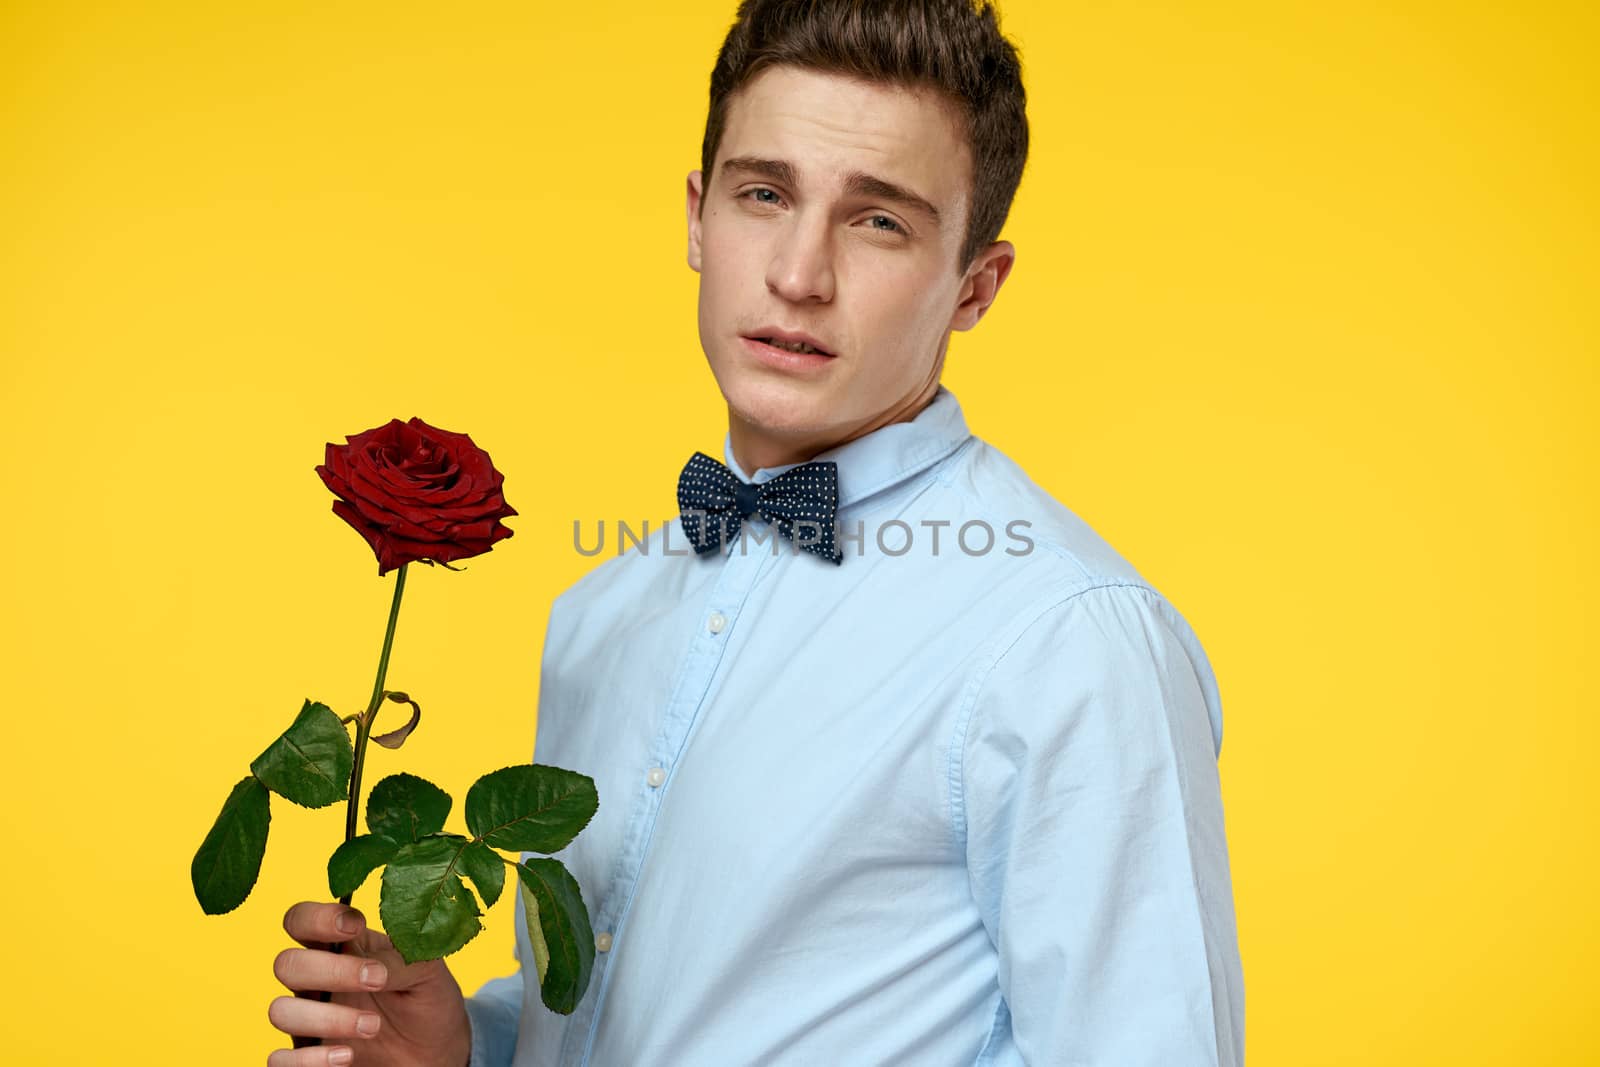 Portrait of a man with a red rose on a yellow background and a light shirt bow tie gentleman by SHOTPRIME